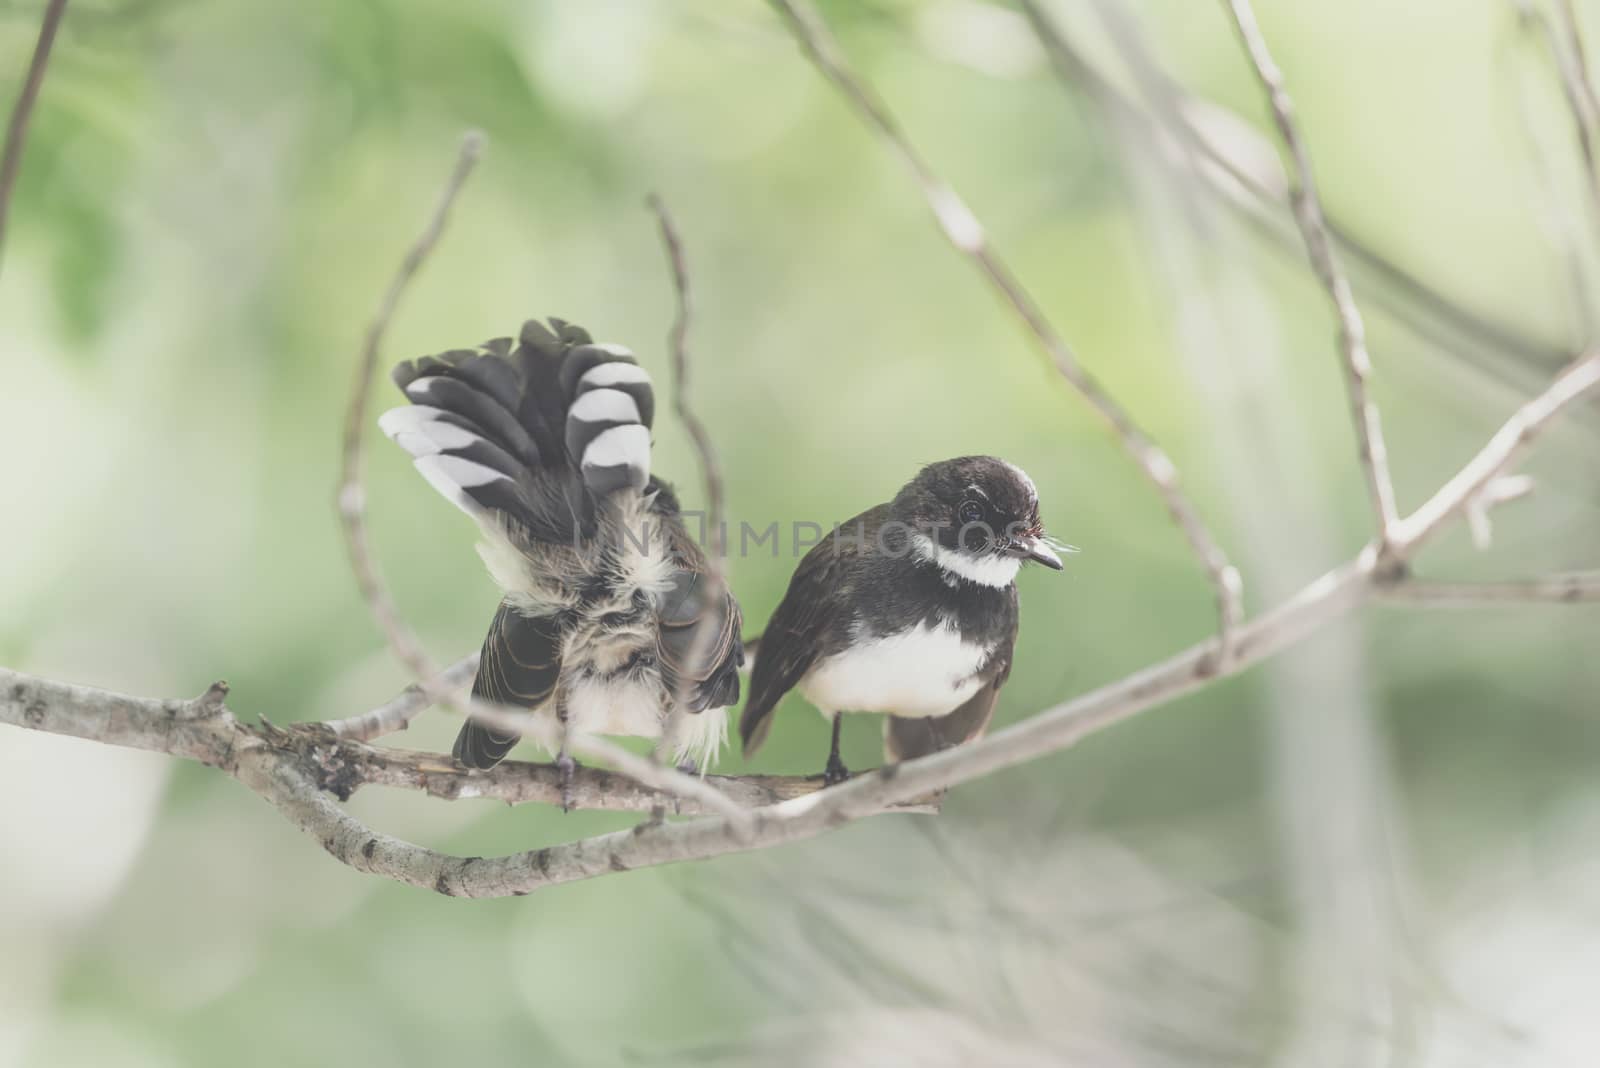 Two birds (Malaysian Pied Fantail, Rhipidura javanica) black and white color are couple, friends or brethren perched on a tree in a nature wild